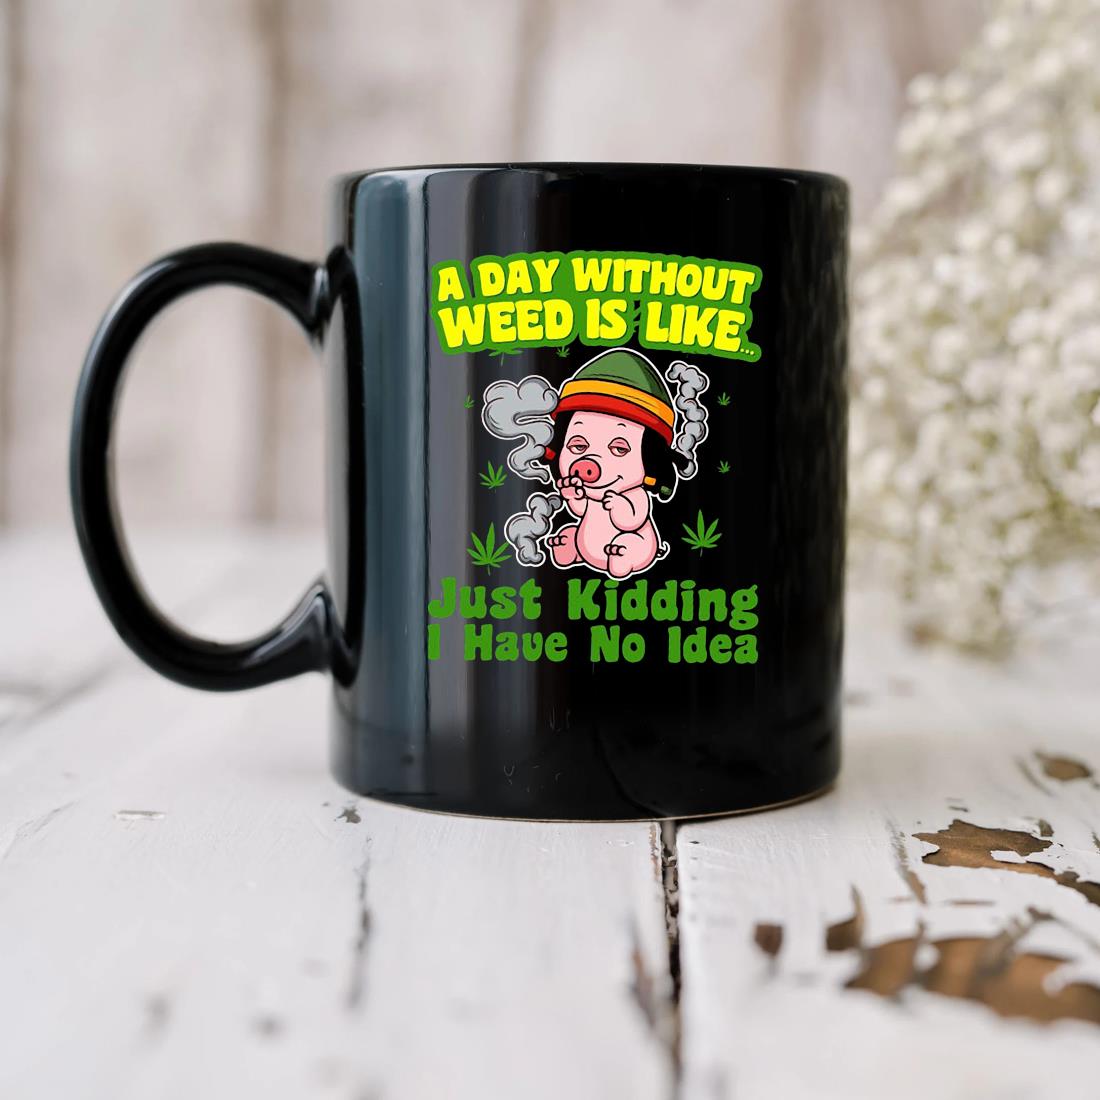 Pig A Day Without Weed Is Like Just Kidding I Have No Idea Mug